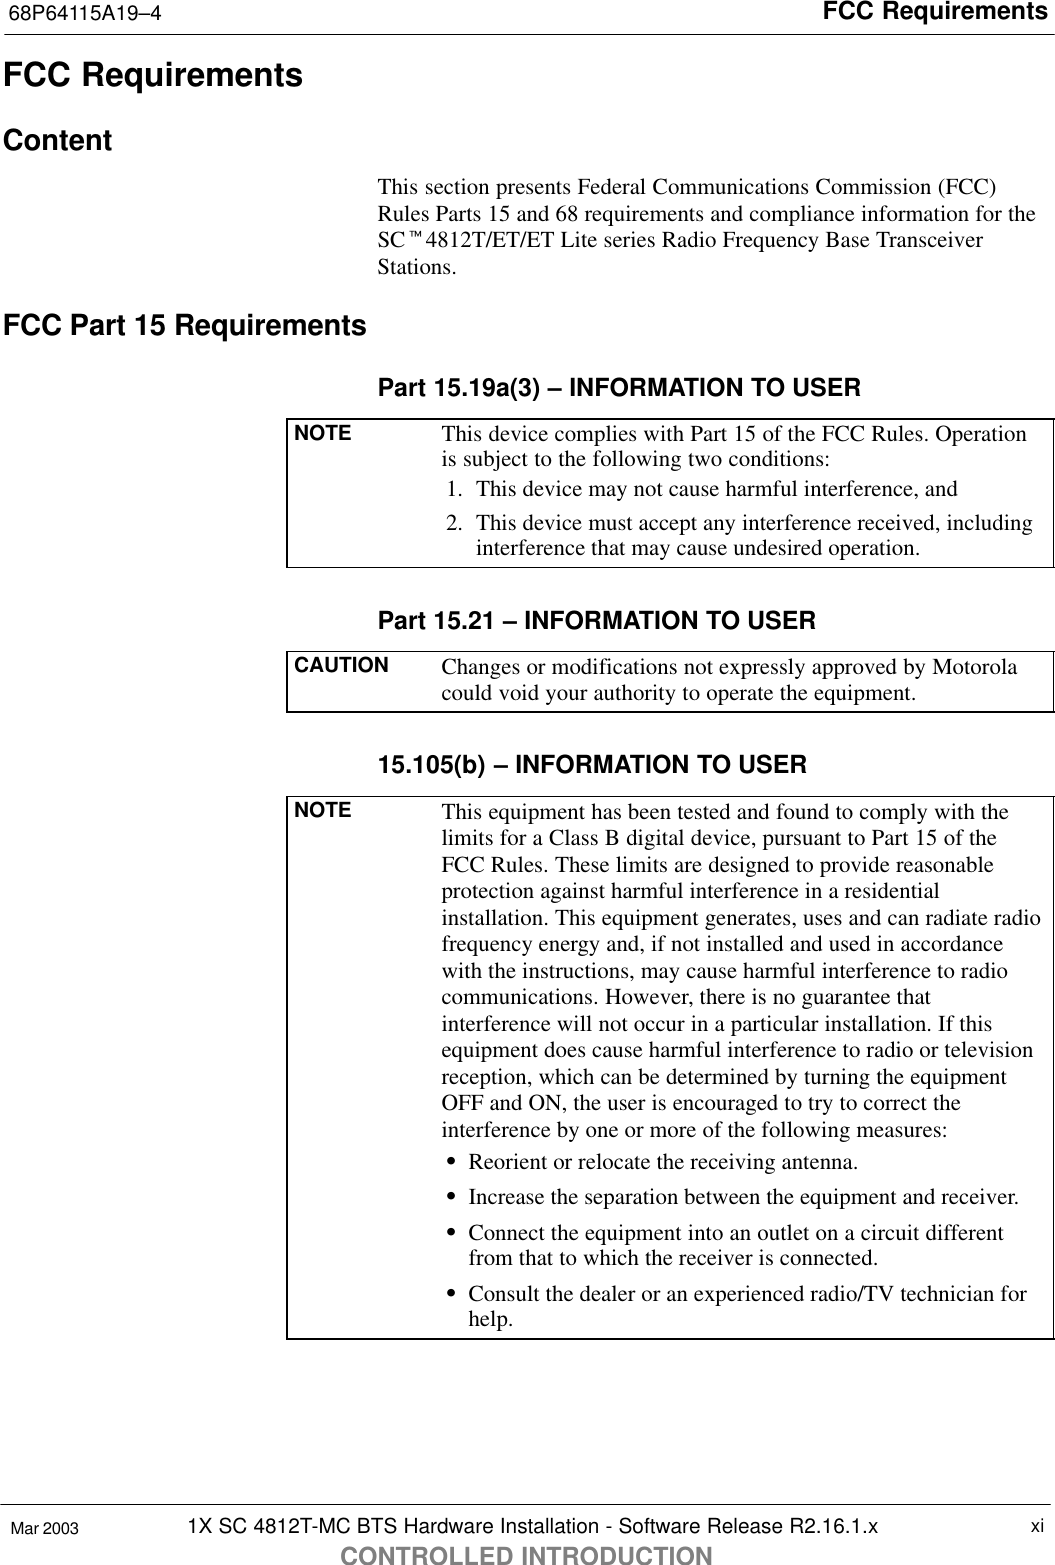 FCC Requirements68P64115A19–41X SC 4812T-MC BTS Hardware Installation - Software Release R2.16.1.xCONTROLLED INTRODUCTIONxiMar 2003FCC RequirementsContentThis section presents Federal Communications Commission (FCC)Rules Parts 15 and 68 requirements and compliance information for theSCt4812T/ET/ET Lite series Radio Frequency Base TransceiverStations.FCC Part 15 RequirementsPart 15.19a(3) – INFORMATION TO USERNOTE This device complies with Part 15 of the FCC Rules. Operationis subject to the following two conditions:1. This device may not cause harmful interference, and2. This device must accept any interference received, includinginterference that may cause undesired operation.Part 15.21 – INFORMATION TO USERCAUTION Changes or modifications not expressly approved by Motorolacould void your authority to operate the equipment.15.105(b) – INFORMATION TO USERNOTE This equipment has been tested and found to comply with thelimits for a Class B digital device, pursuant to Part 15 of theFCC Rules. These limits are designed to provide reasonableprotection against harmful interference in a residentialinstallation. This equipment generates, uses and can radiate radiofrequency energy and, if not installed and used in accordancewith the instructions, may cause harmful interference to radiocommunications. However, there is no guarantee thatinterference will not occur in a particular installation. If thisequipment does cause harmful interference to radio or televisionreception, which can be determined by turning the equipmentOFF and ON, the user is encouraged to try to correct theinterference by one or more of the following measures:SReorient or relocate the receiving antenna.SIncrease the separation between the equipment and receiver.SConnect the equipment into an outlet on a circuit differentfrom that to which the receiver is connected.SConsult the dealer or an experienced radio/TV technician forhelp.